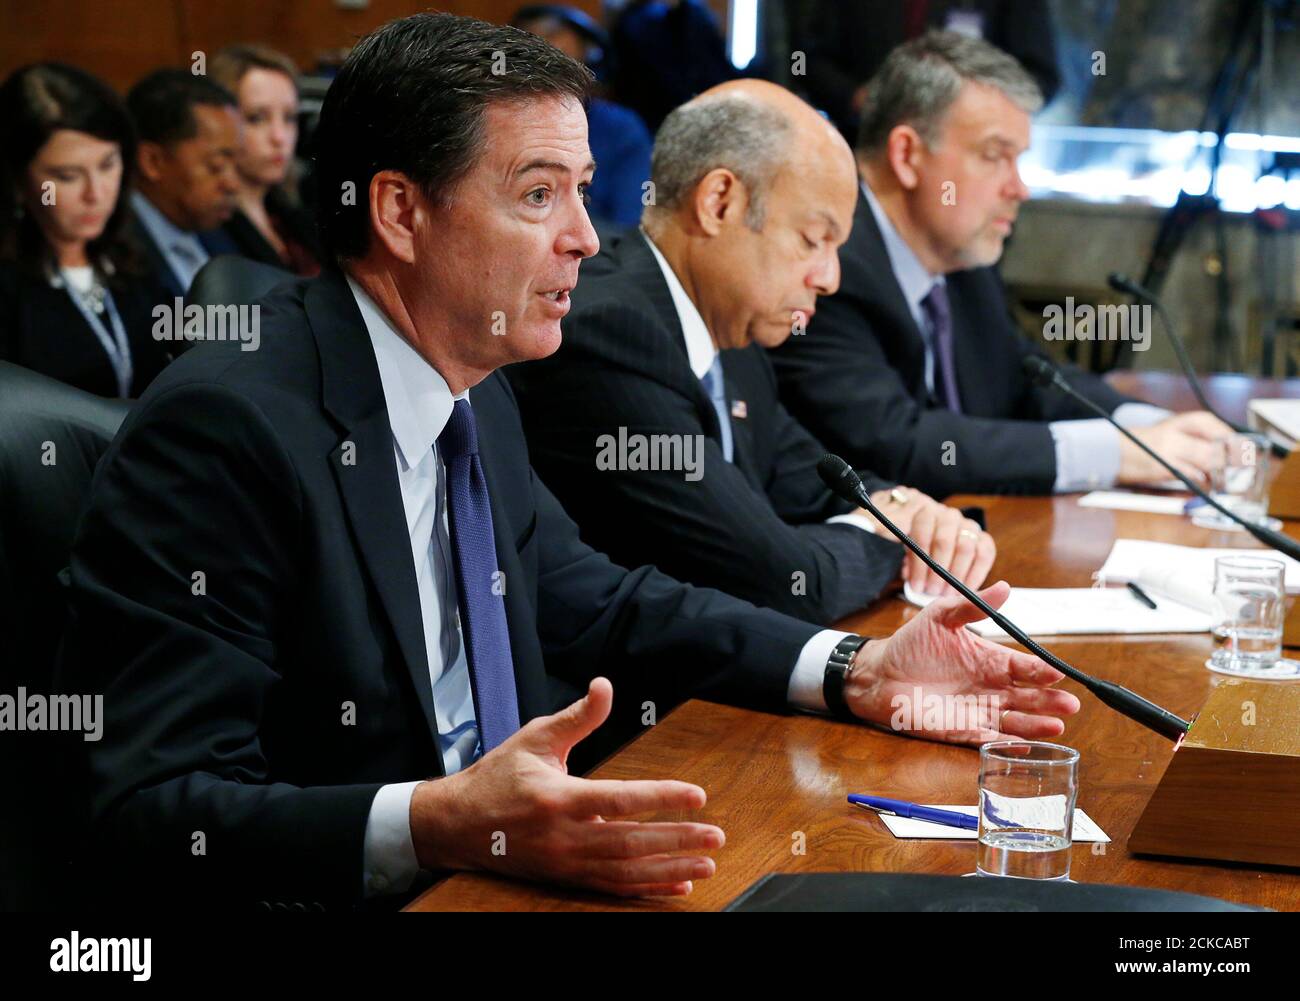 FBI Director James Comey Jr. (L) testifies on 'Threats to the Homeland' as Homeland Security Secretary Jeh Johnson (C) and Director of the National Counterterrorism Center Nicholas Rasmussen listen during a Senate Homeland Security and Governmental Affairs Committee hearing on Capitol Hill in Washington, October 8, 2015. REUTERS/Jim Bourg Stock Photo